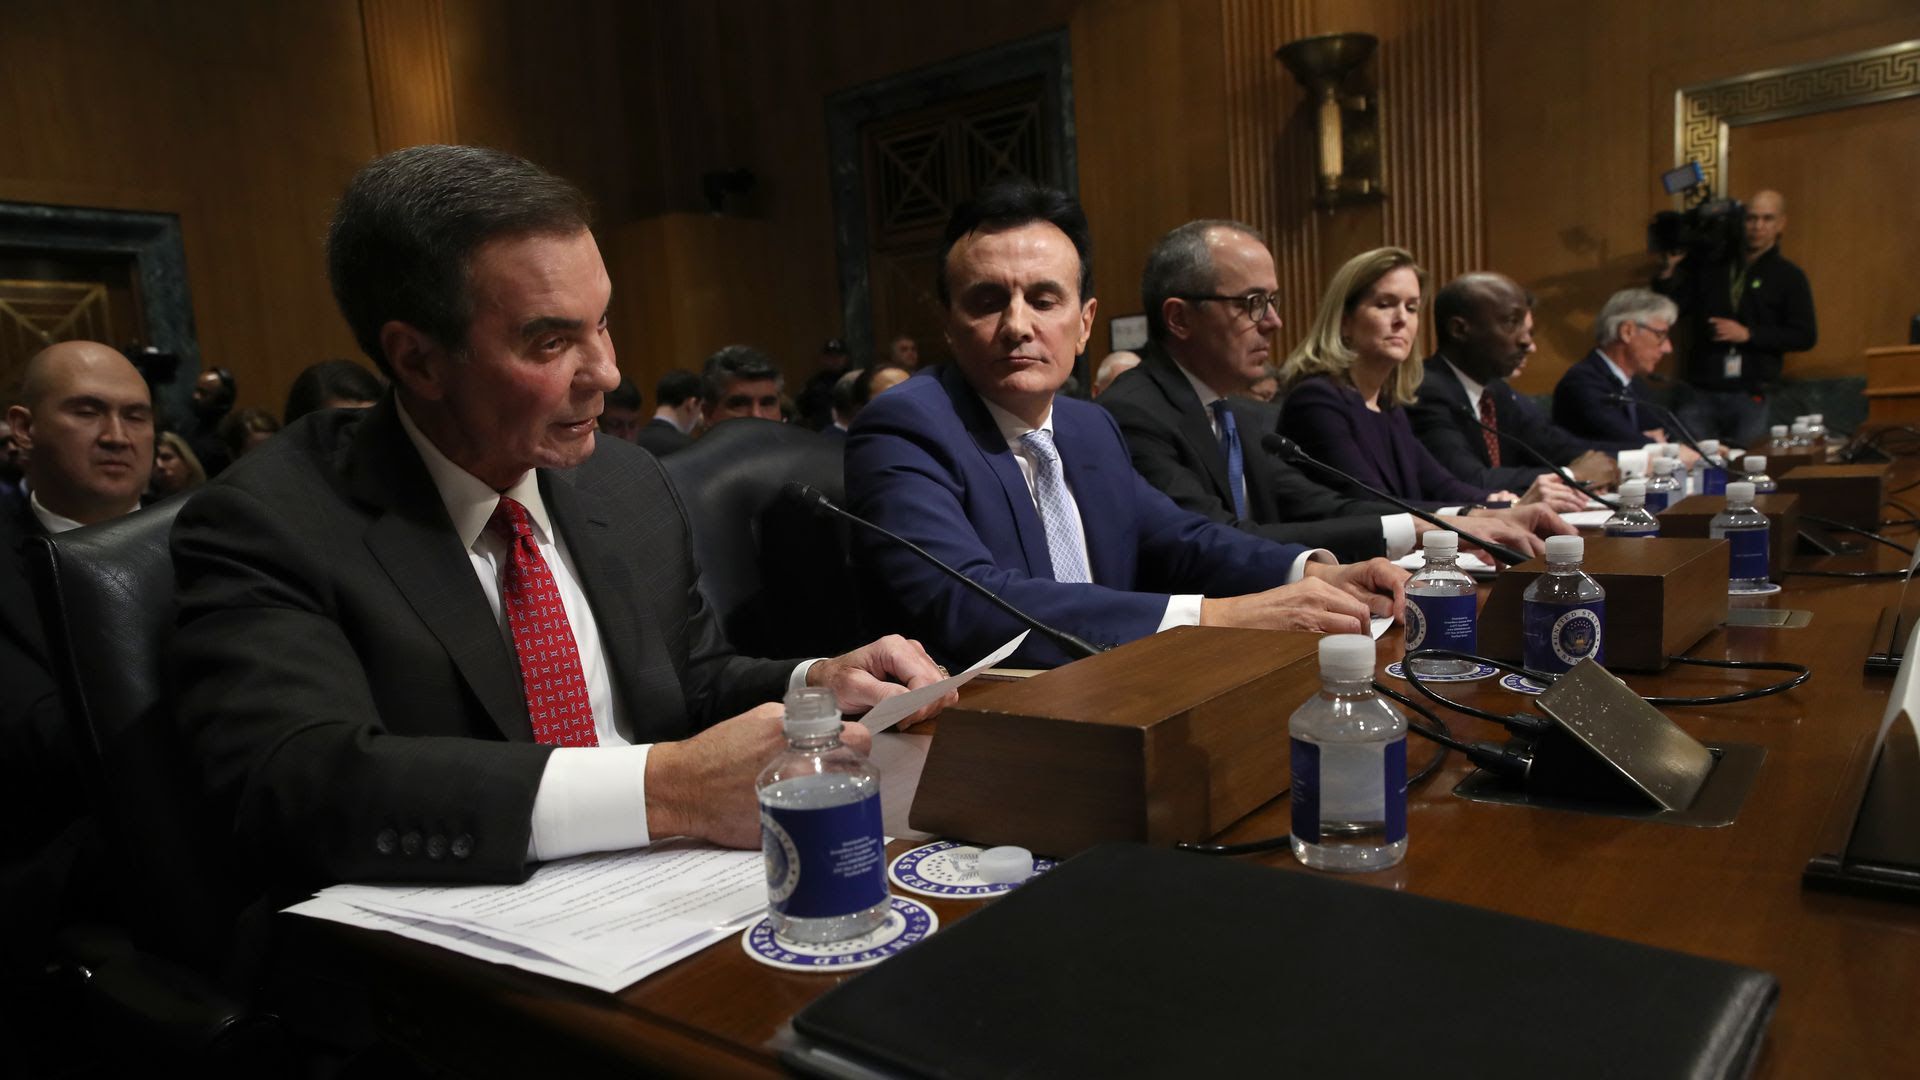 Pharma CEOs, including AbbVie's Richard Gonzalez, testify on Capitol Hill. Photo: Win McNamee/Getty Images